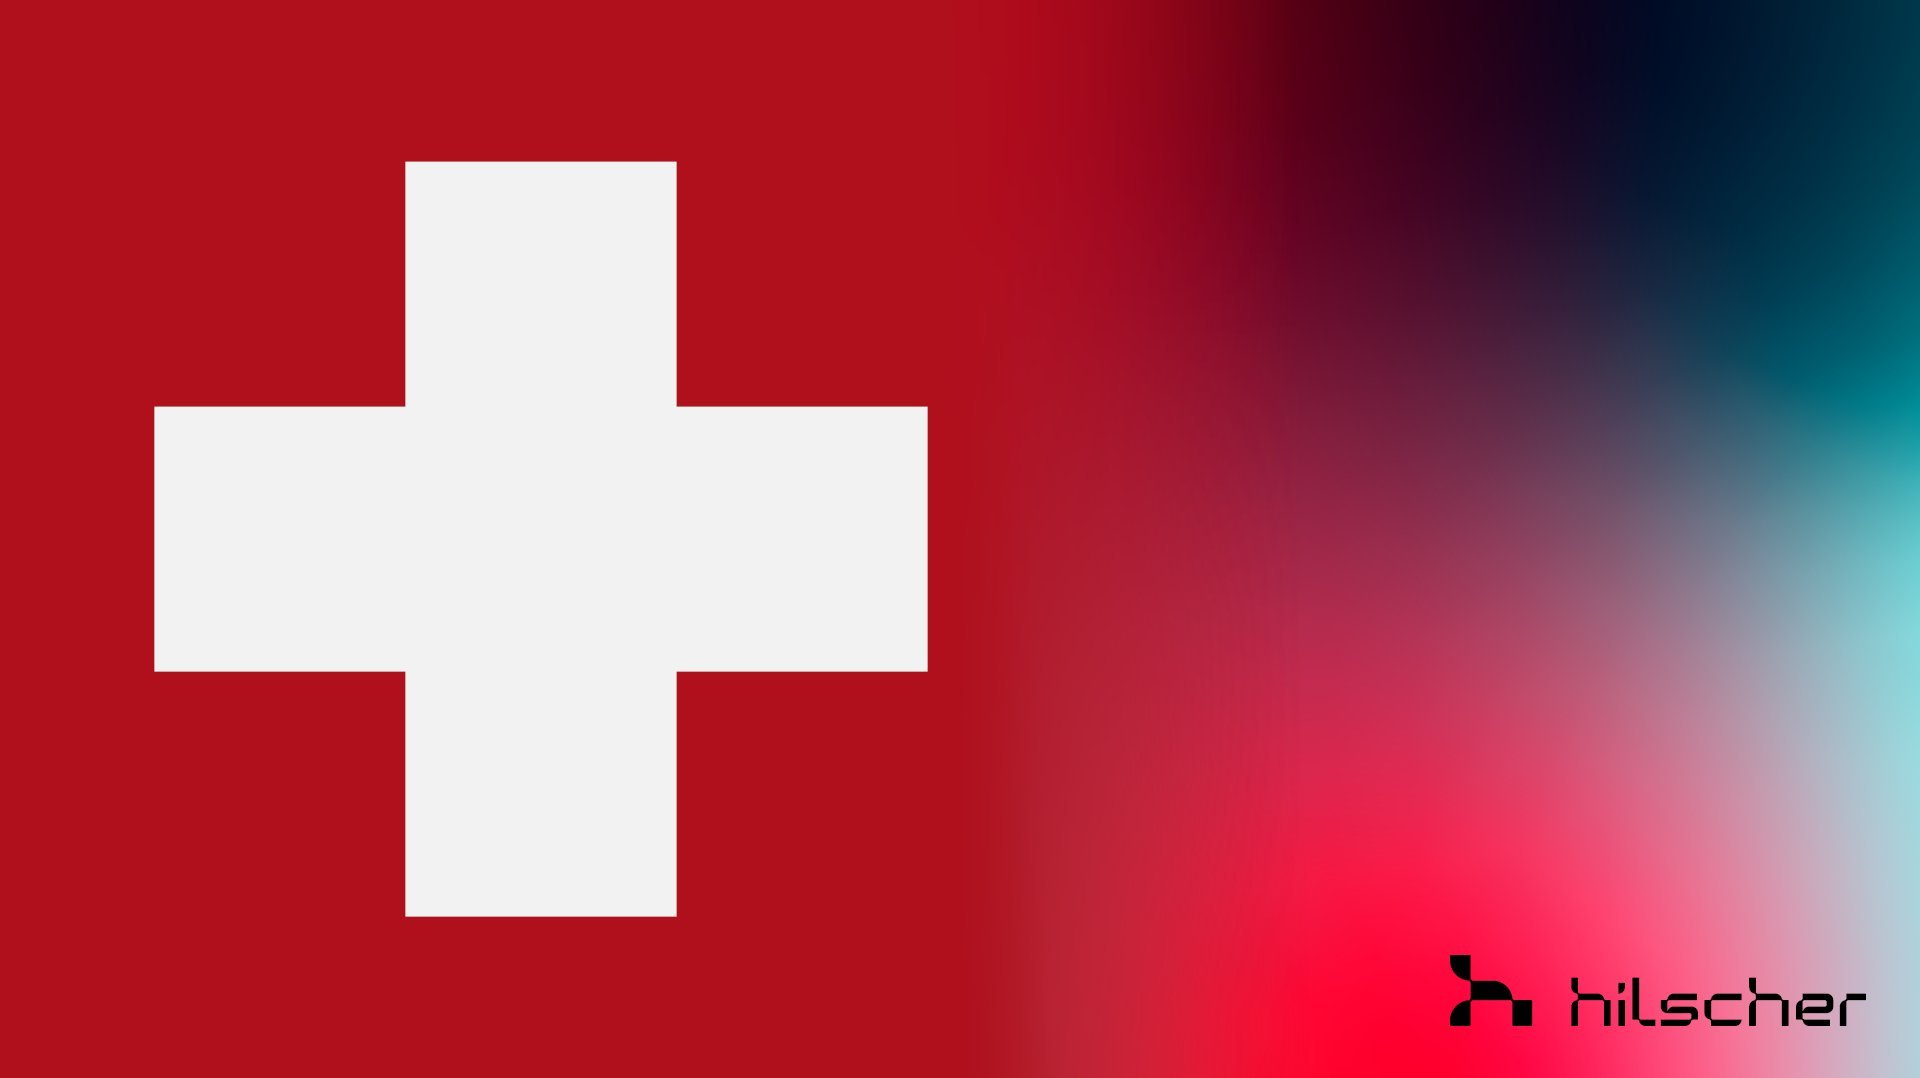 The flag of Switzerland. On the right side of the picture is a fade to a colorful space, accounting for nearly a quarter of the image.